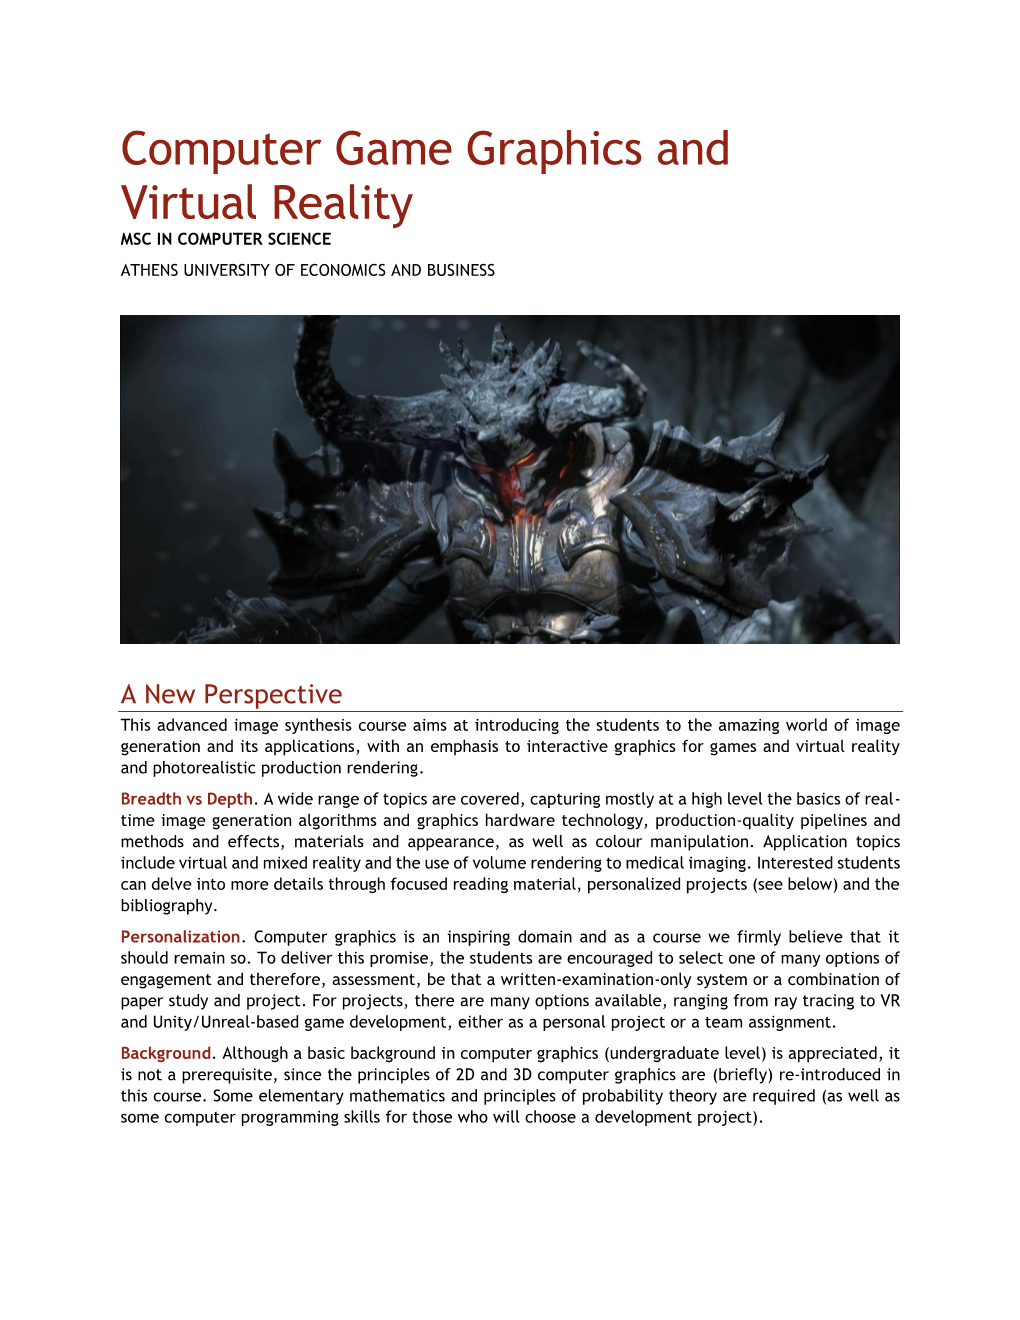 Computer Game Graphics and Virtual Reality MSC in COMPUTER SCIENCE ATHENS UNIVERSITY of ECONOMICS and BUSINESS